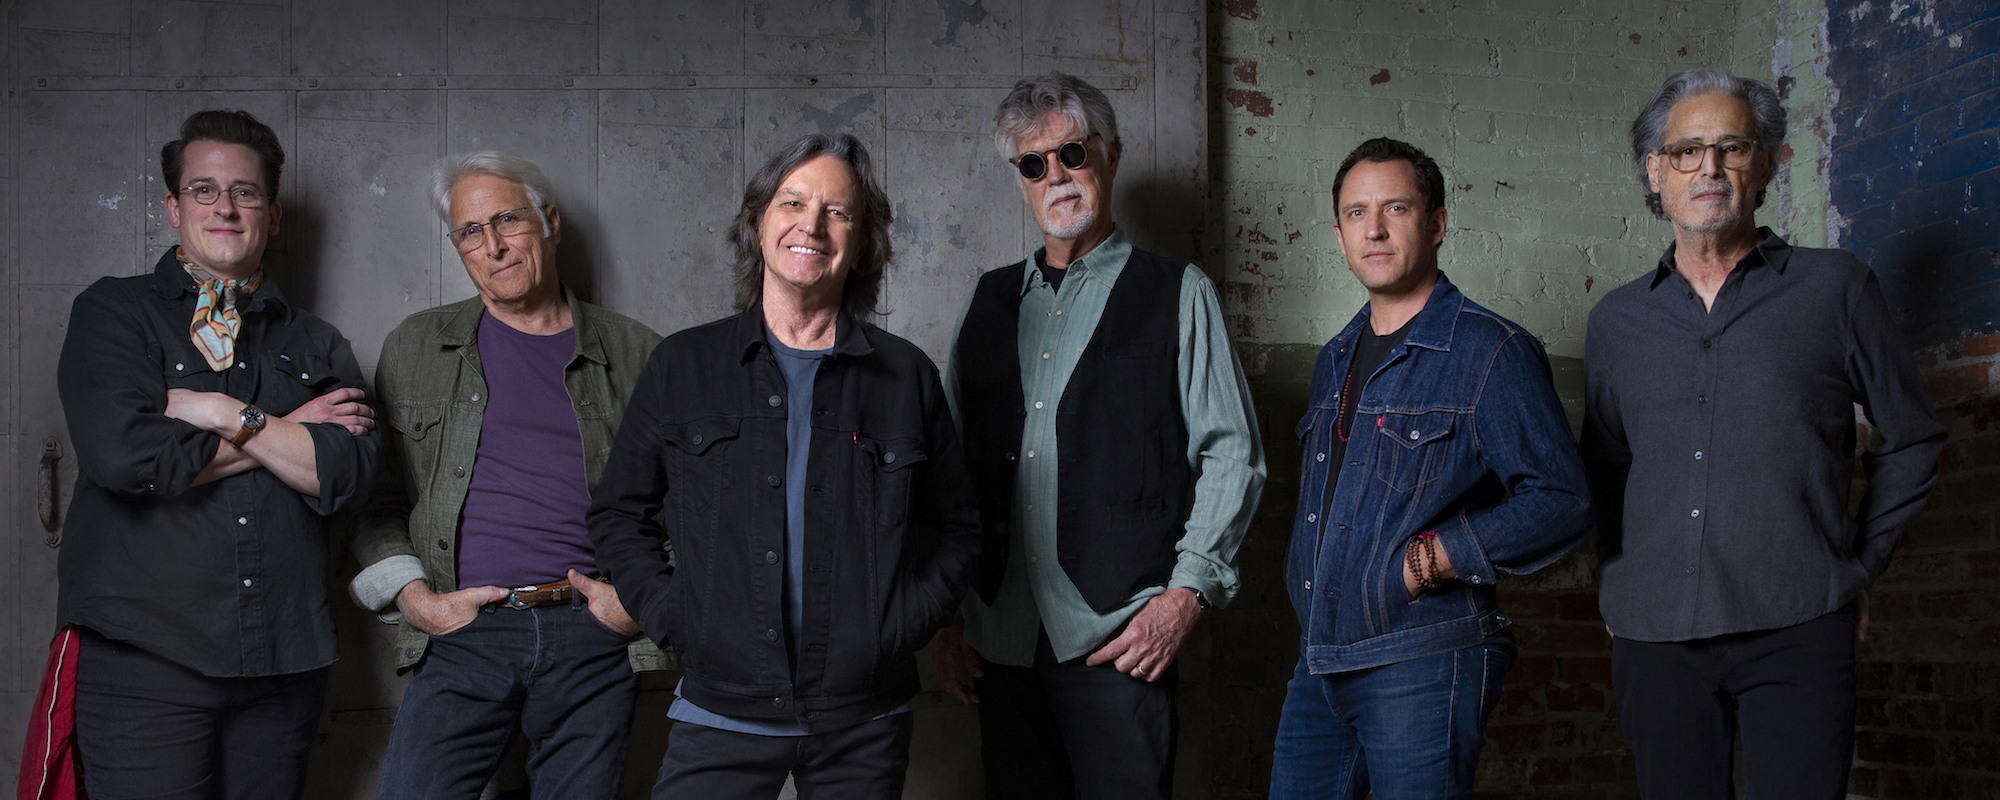 Jeff Hanna on Why The Nitty Gritty Dirt Band Took on Bob Dylan